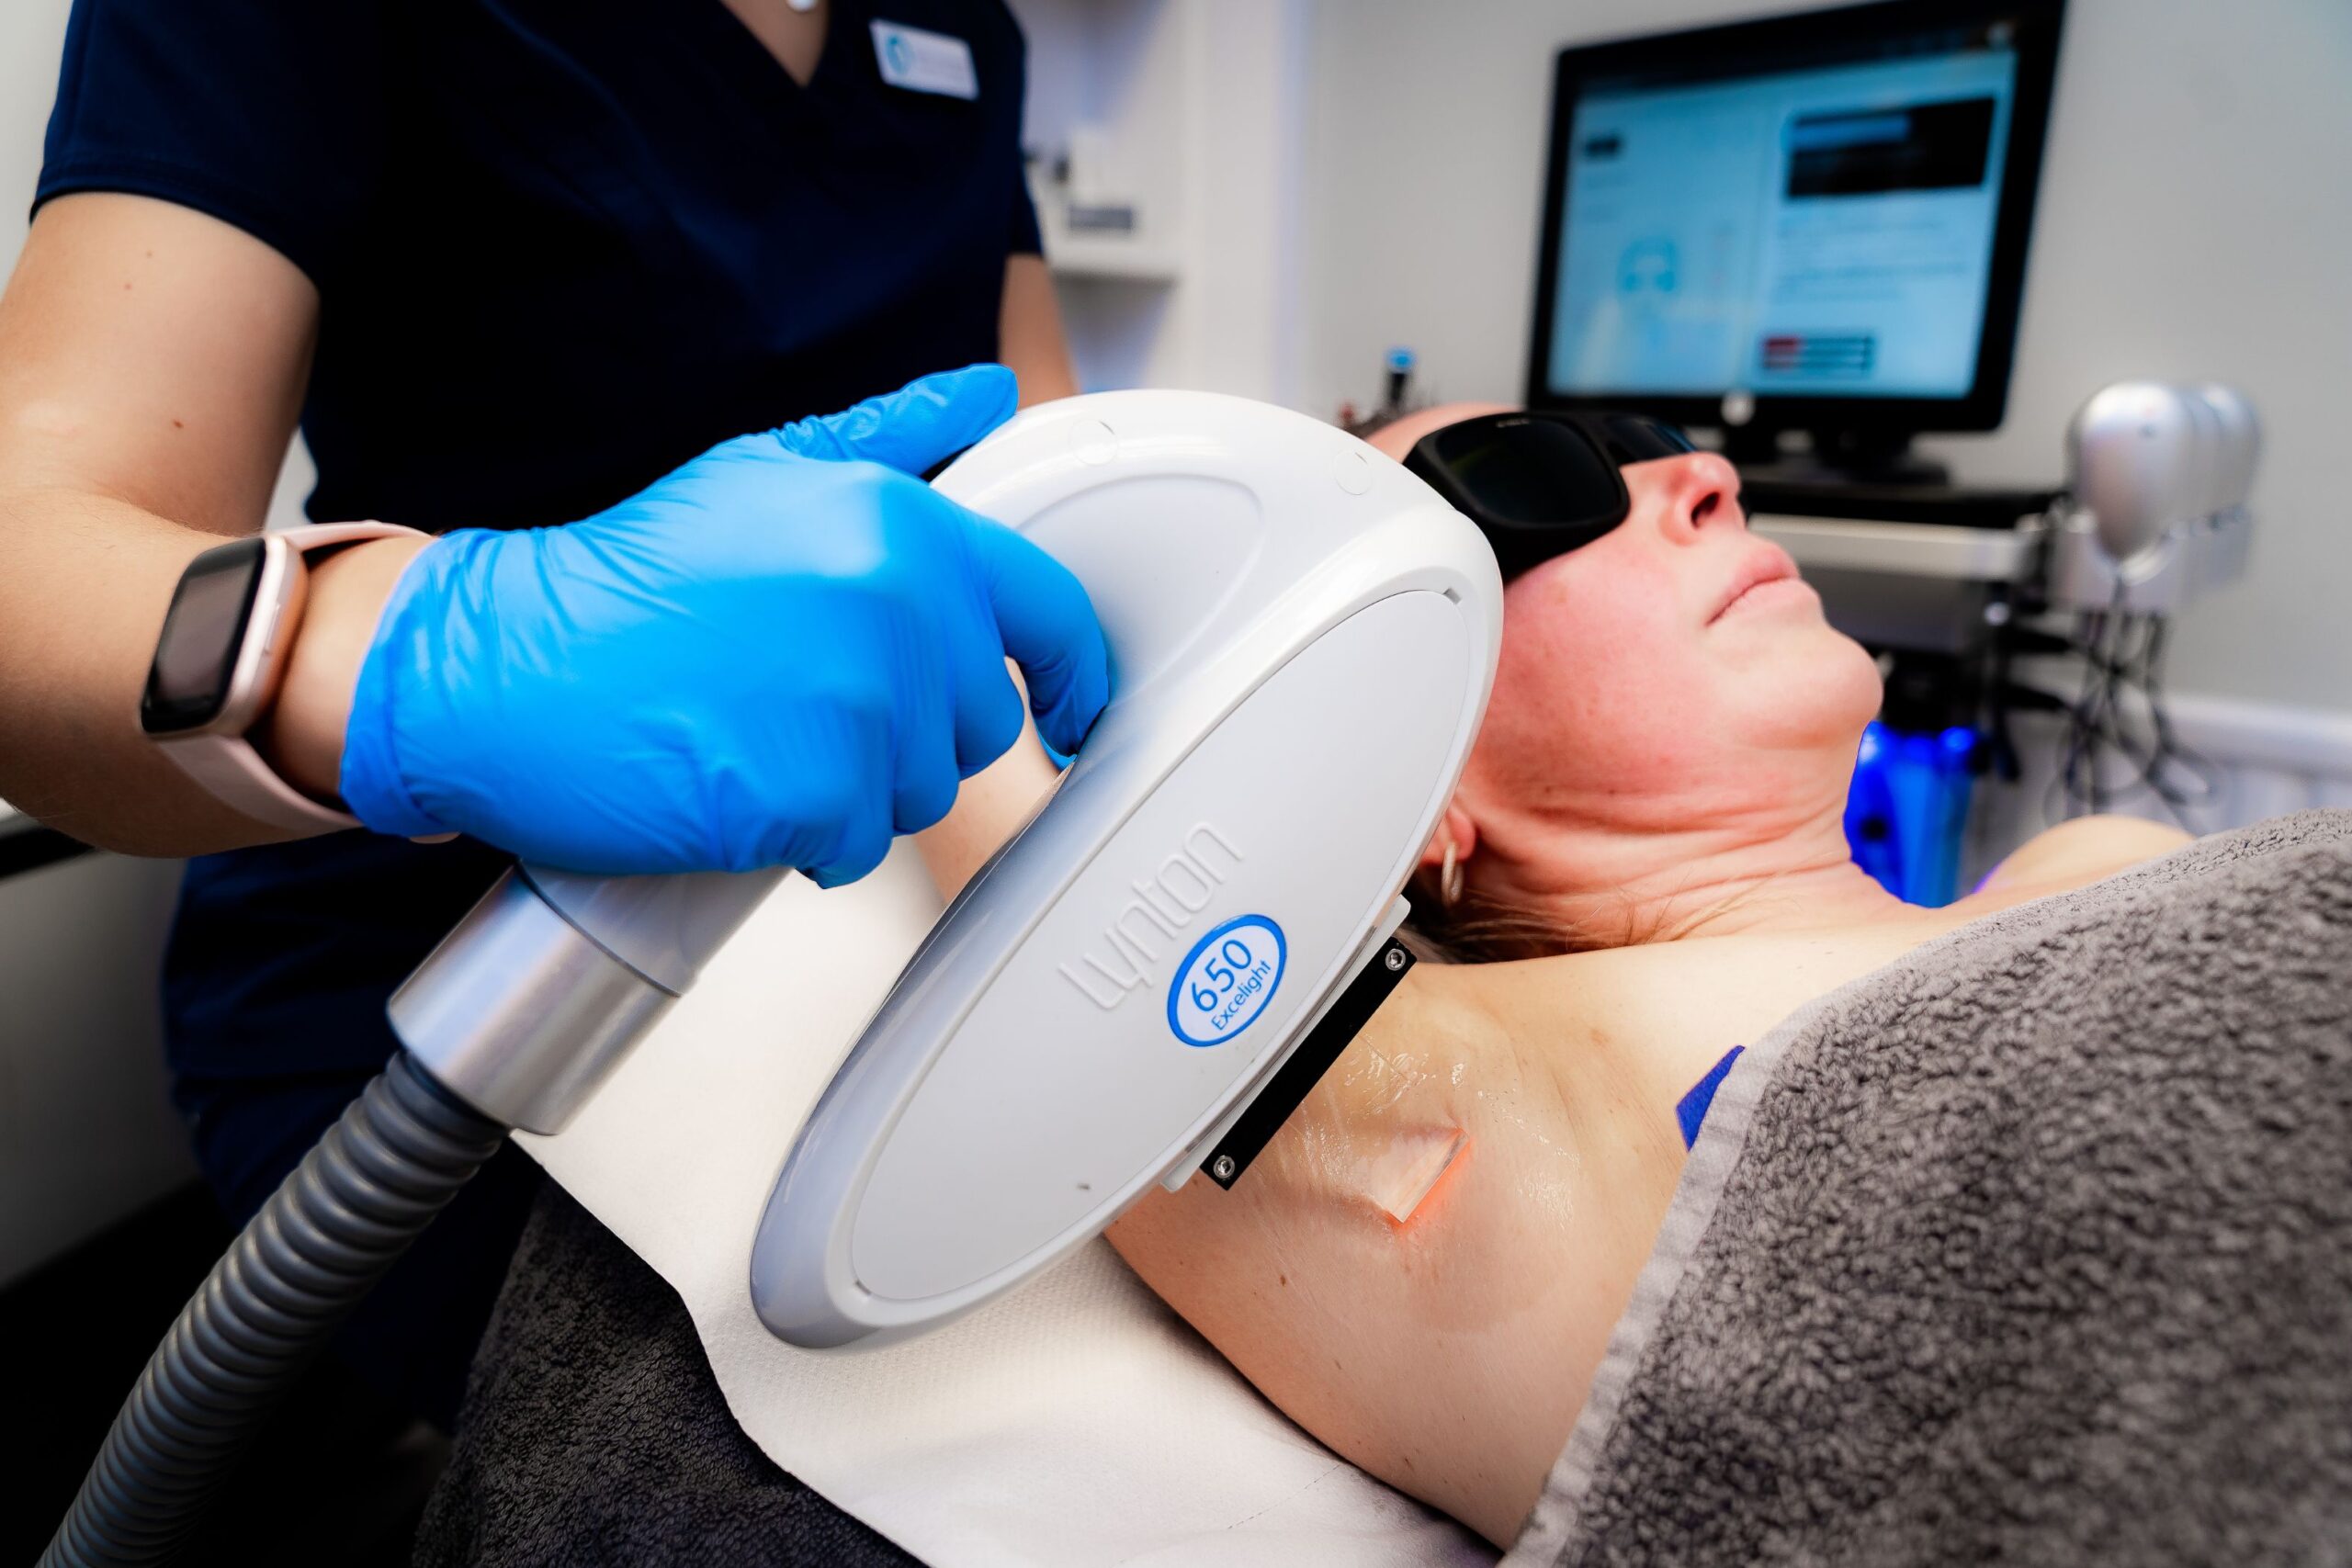 IPL treatments for unwanted hair at Freyja Medical in Wrexham, Nantwich and Cheshire